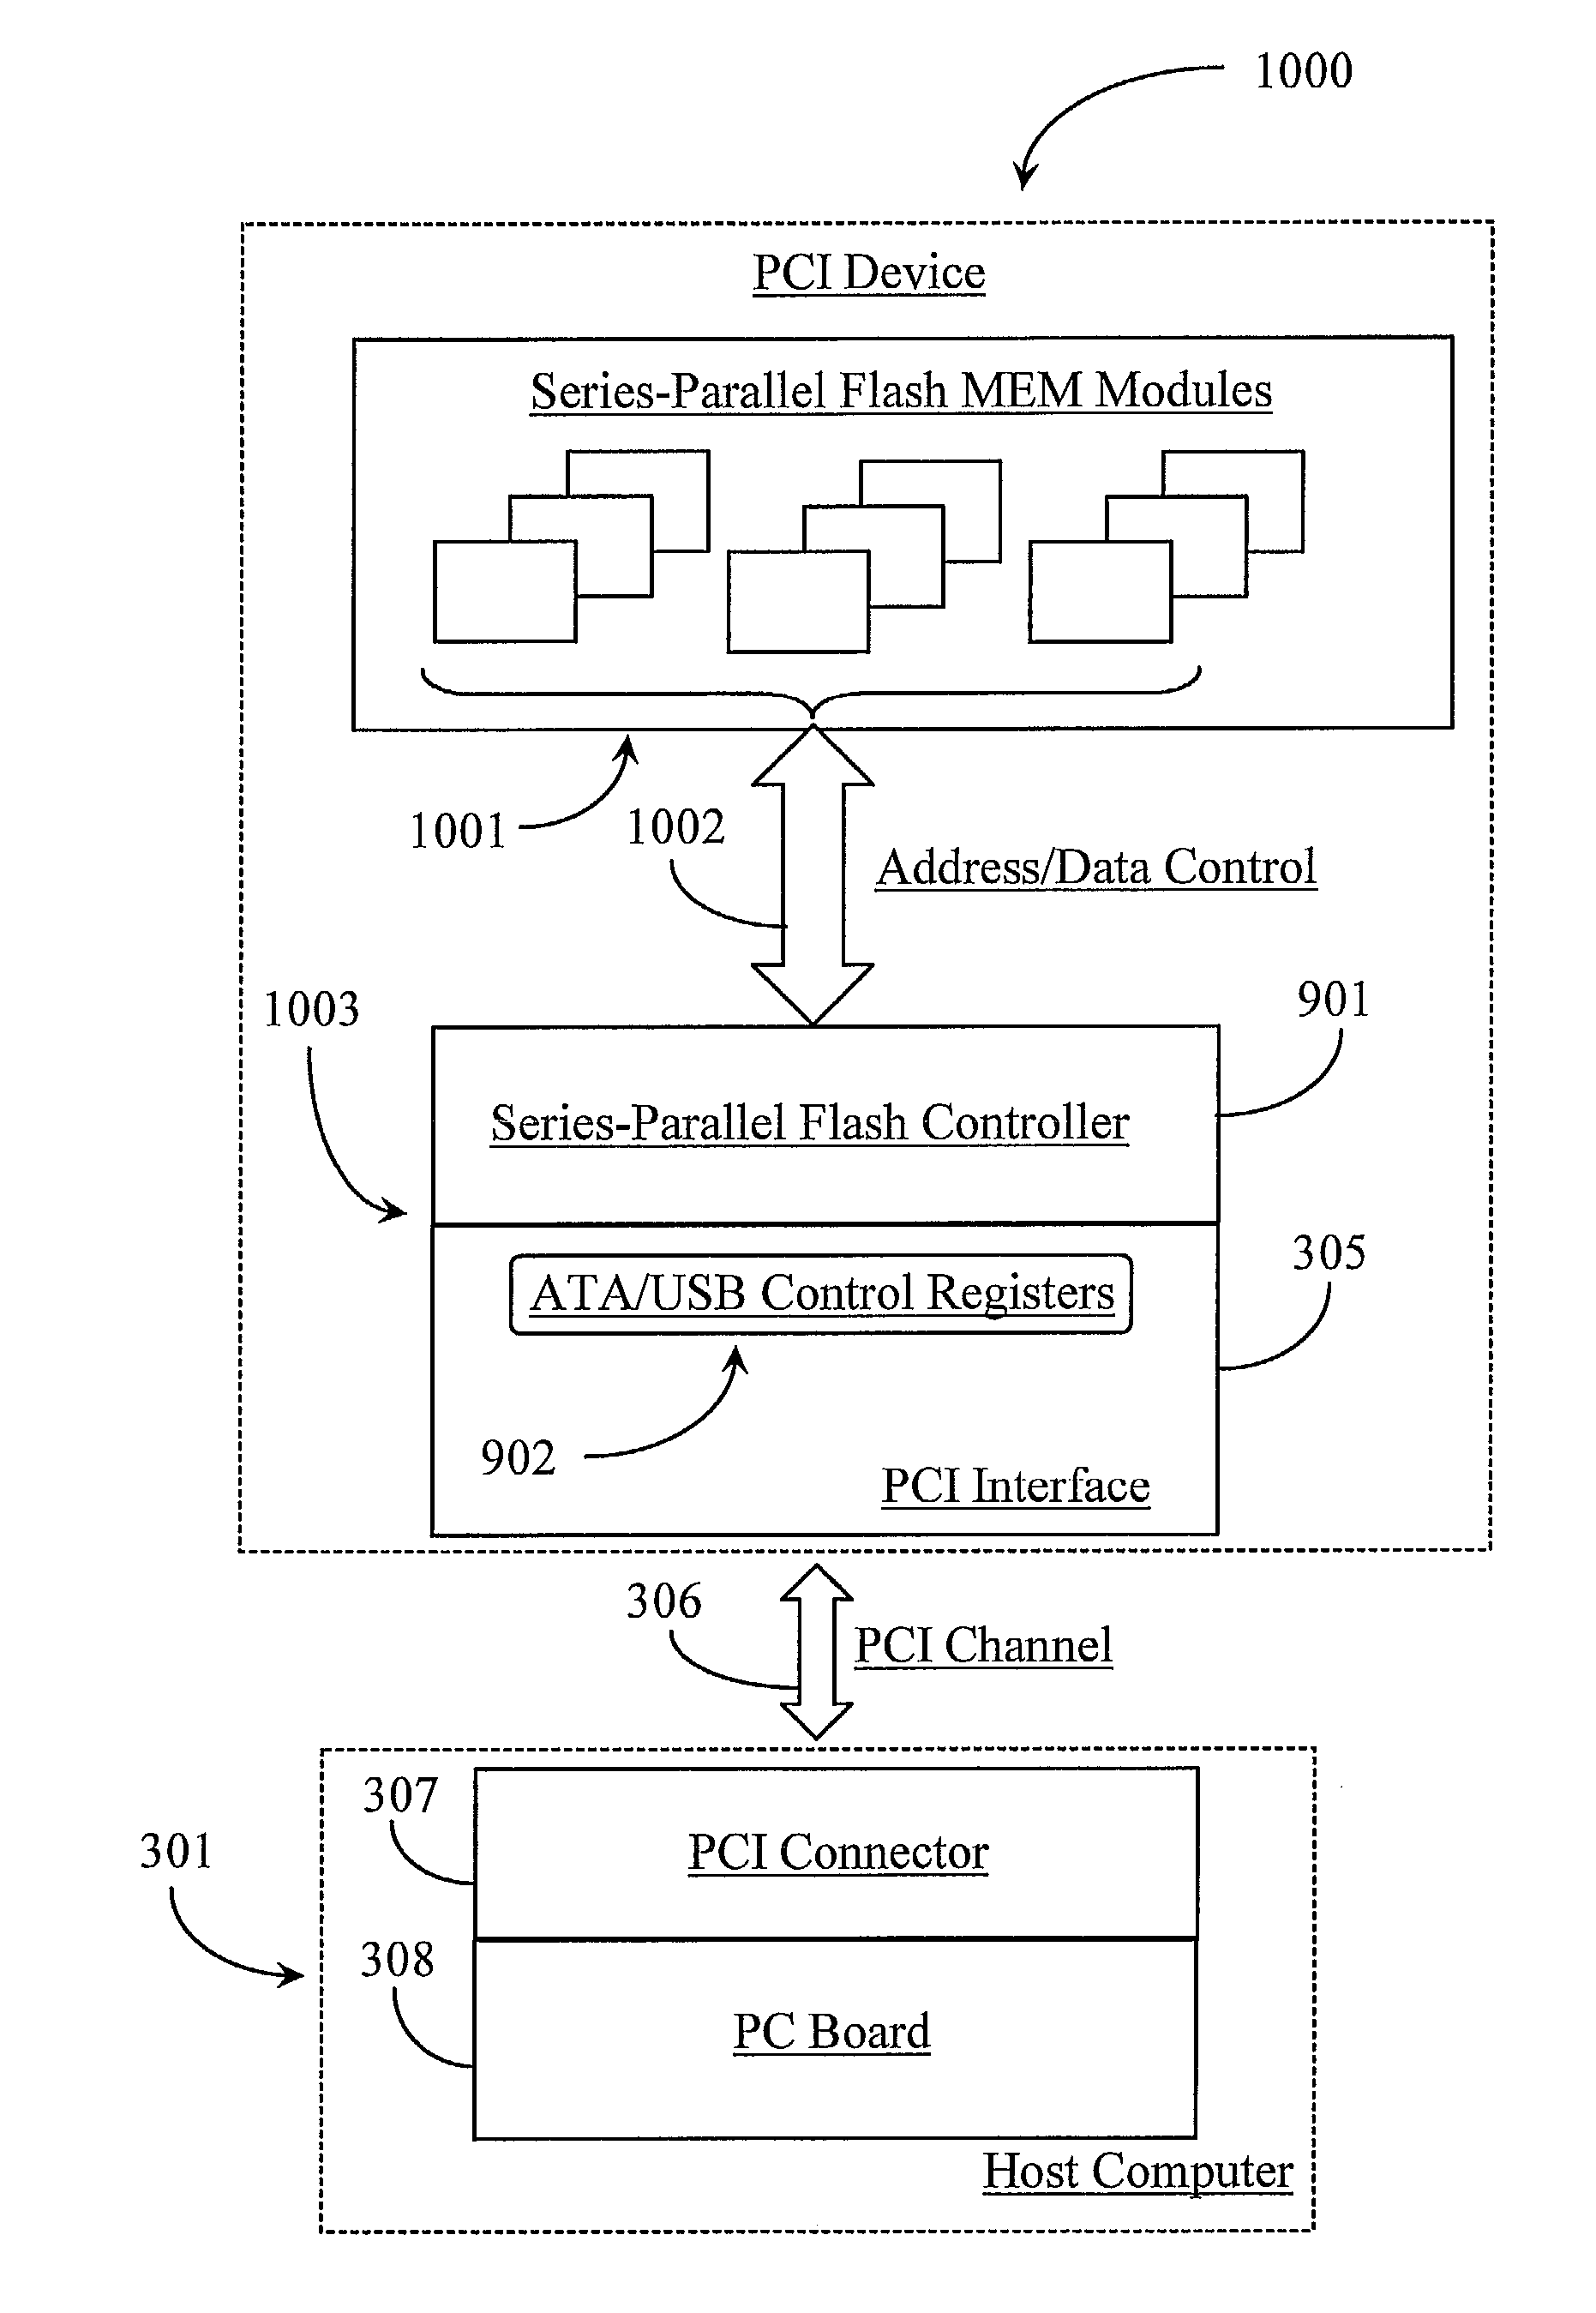 Solid state memory device with PCI controller